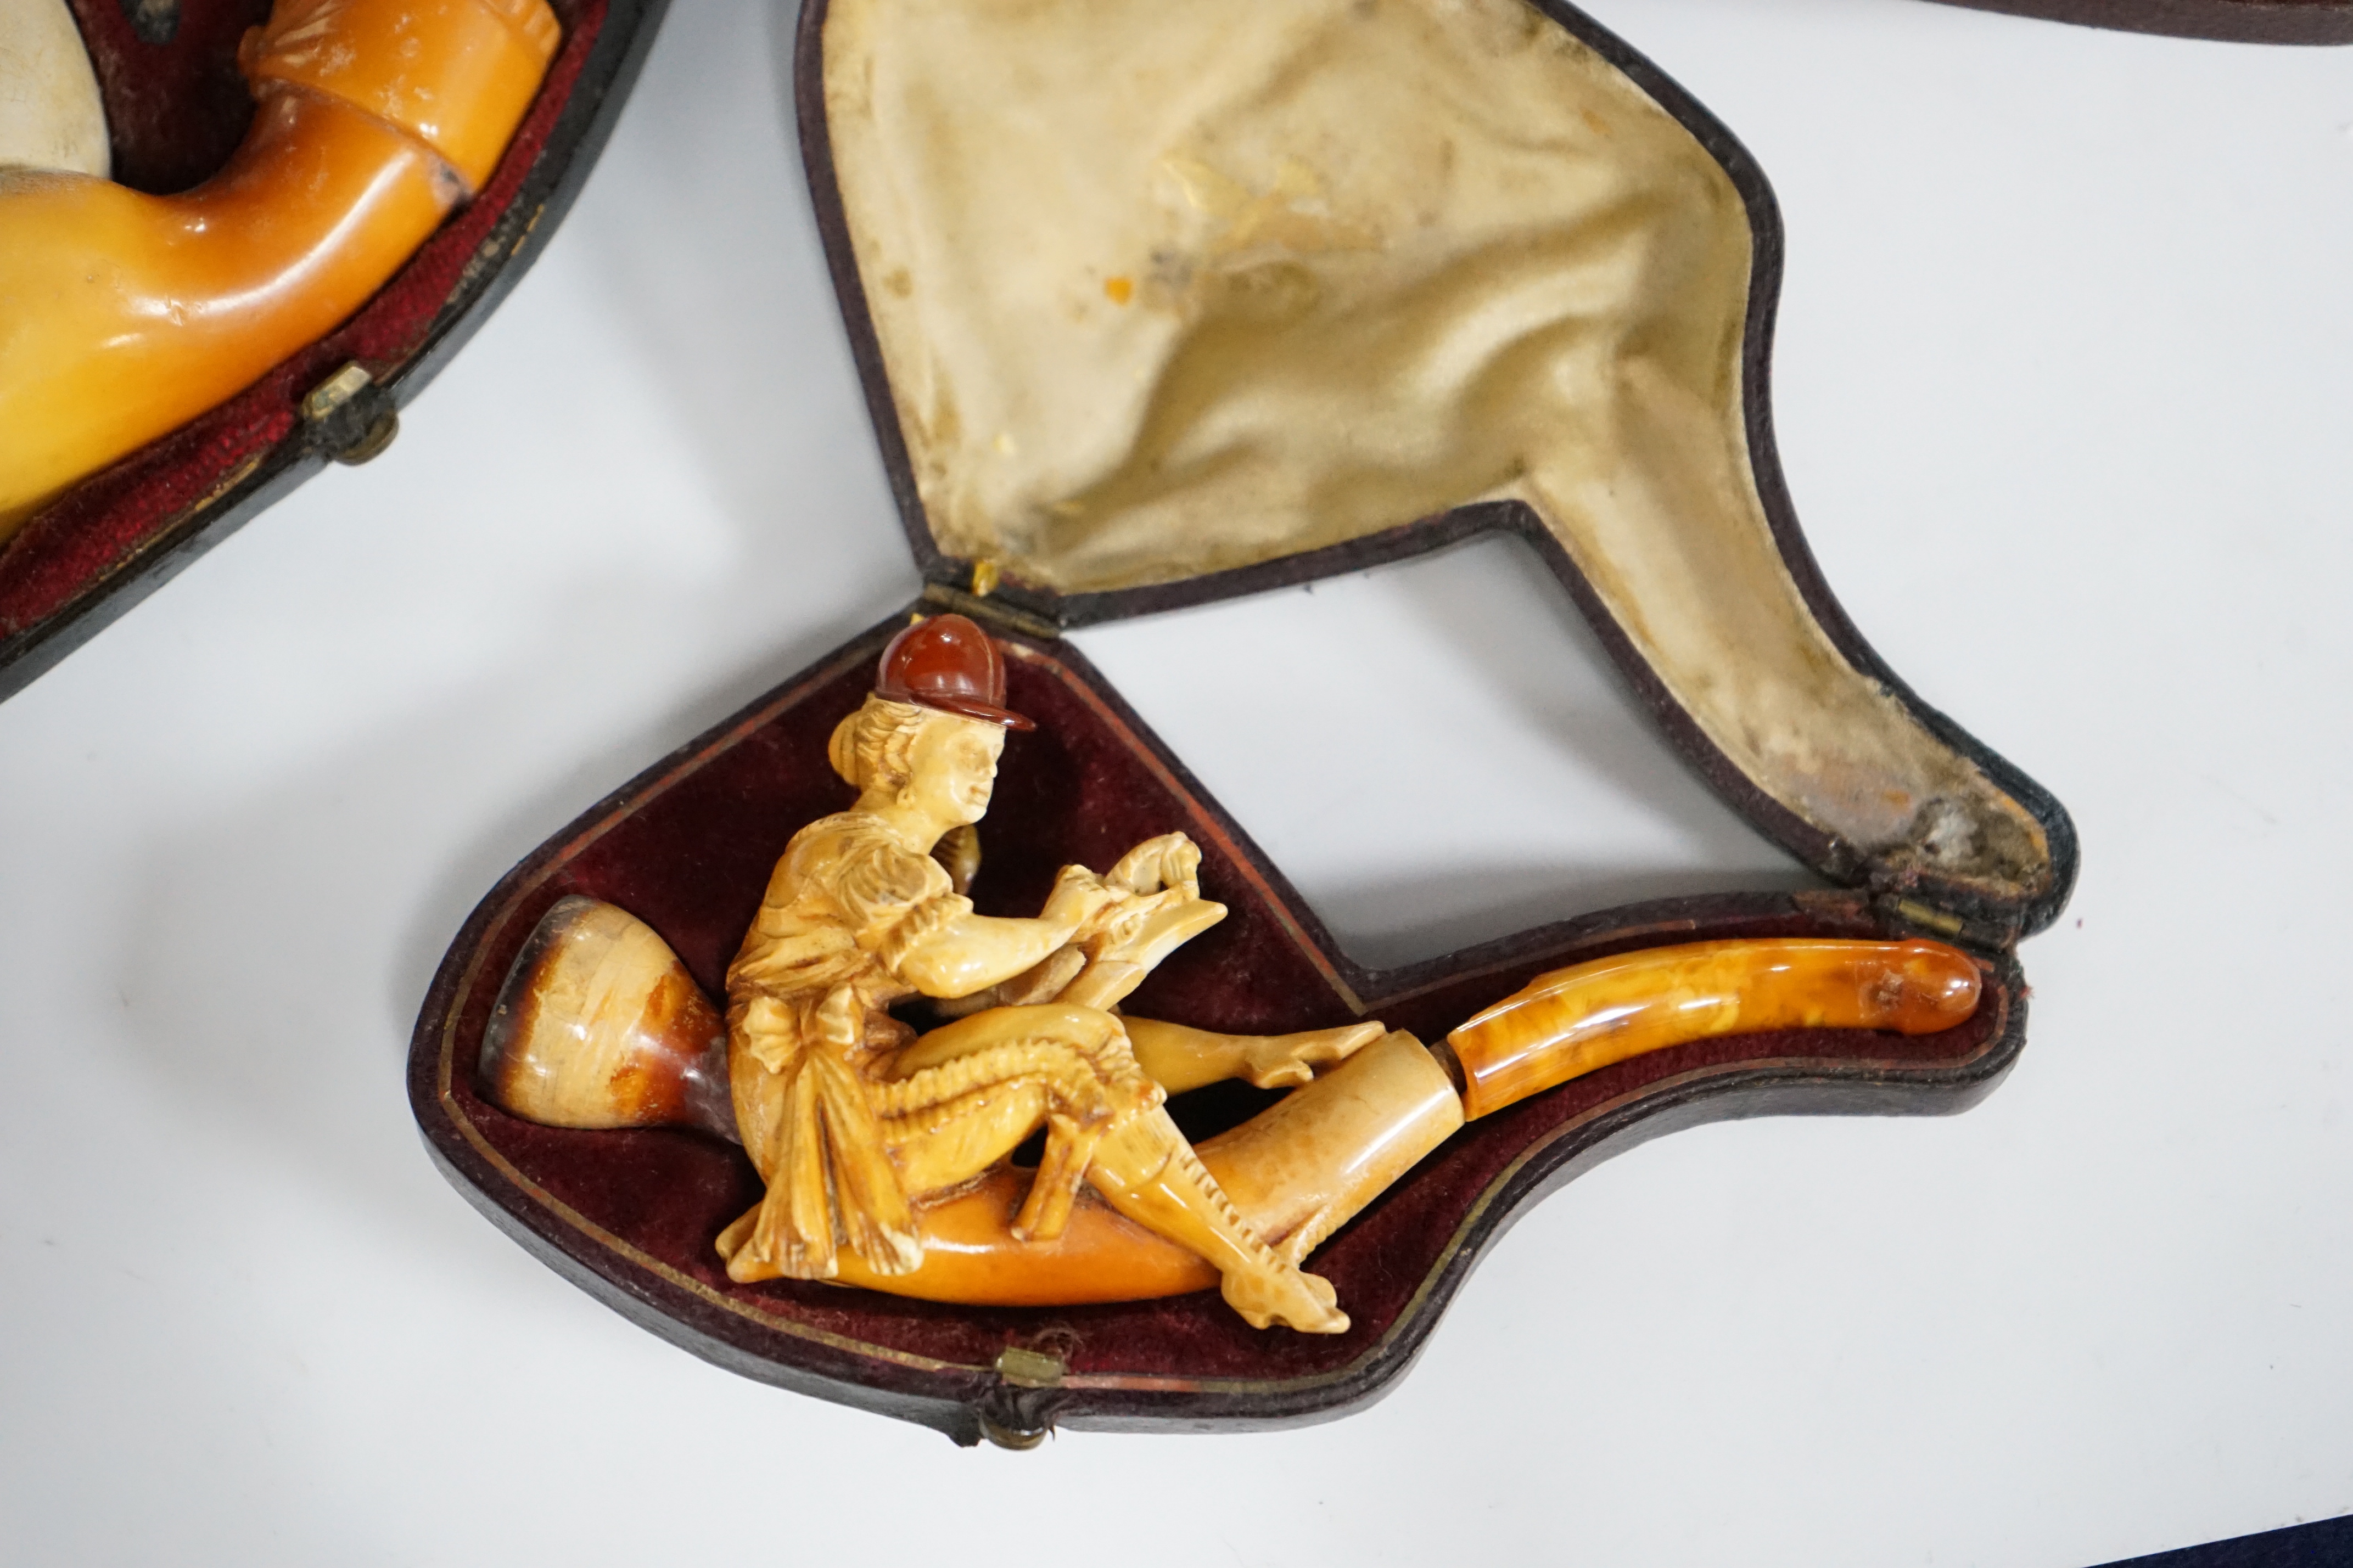 Three cased novelty Meerschaum pipes and pipe bowls, all with amber mouth pieces, one of a horses and cowboy, another a model of a hand and the other of a scantily clad lady wearing a riding cap, largest 17 cm long